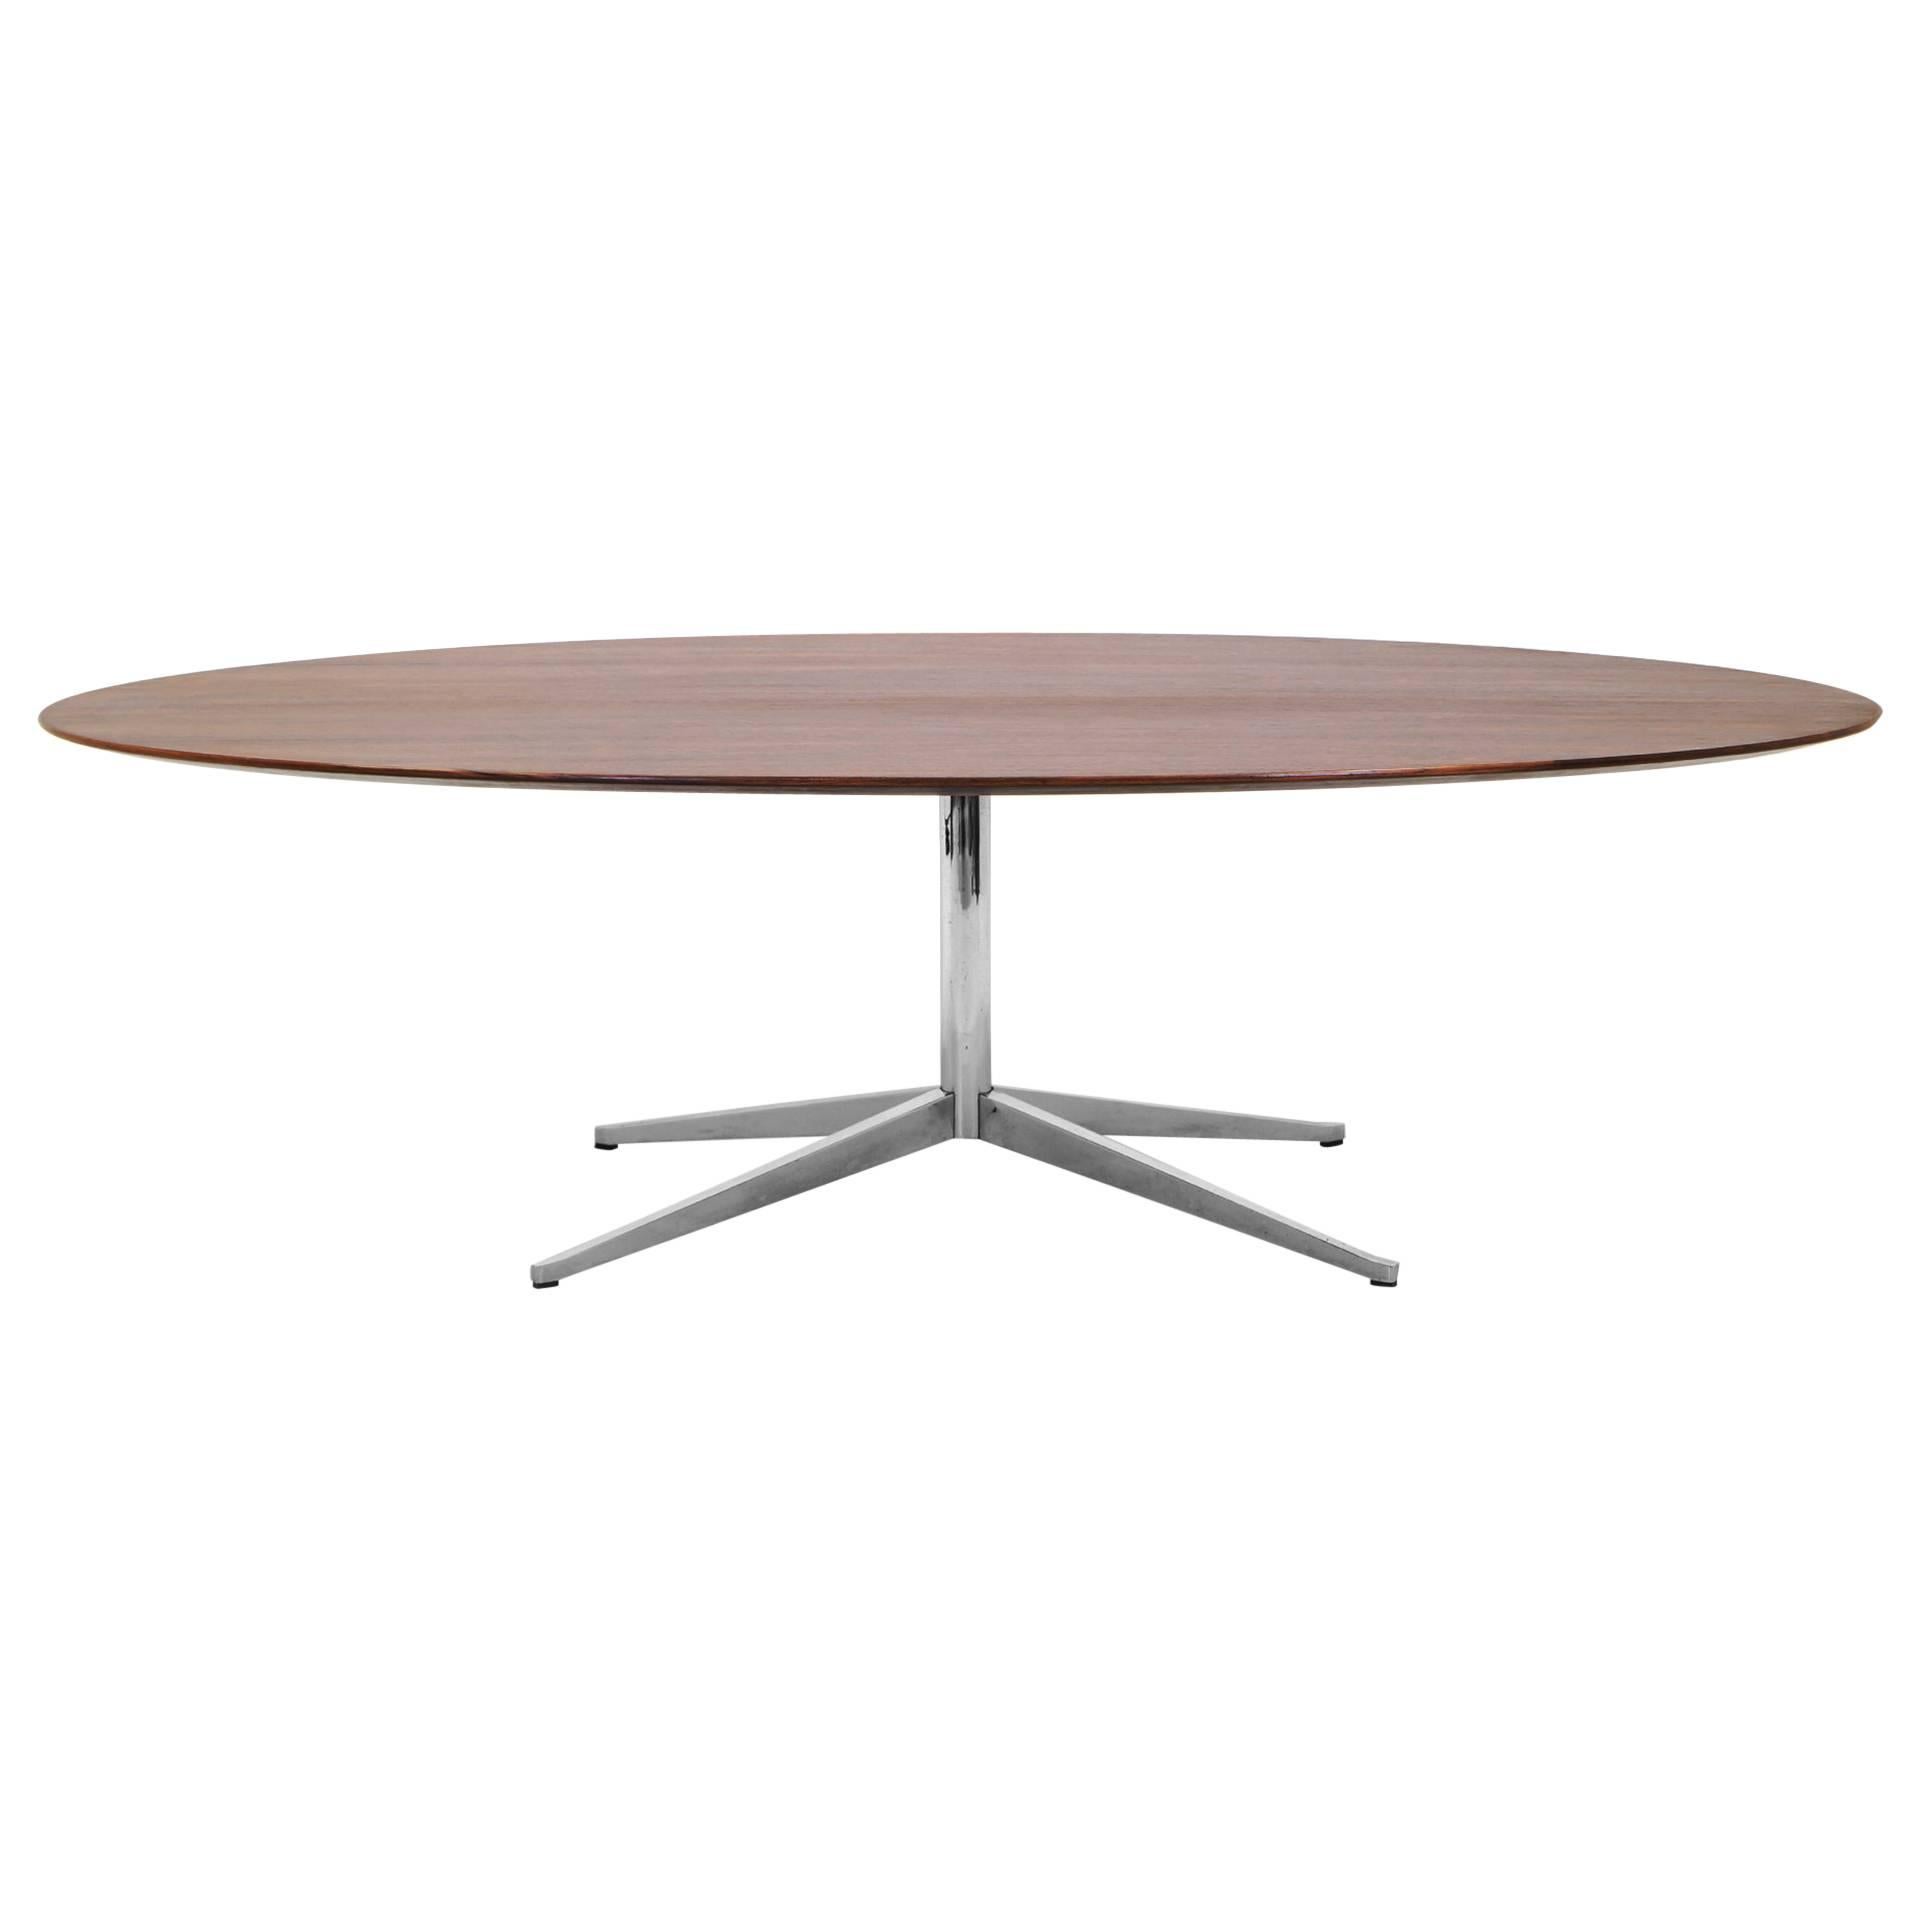 Florence Knoll Elliptical / Oval 96 Inch Rosewood Dining or Conference Table